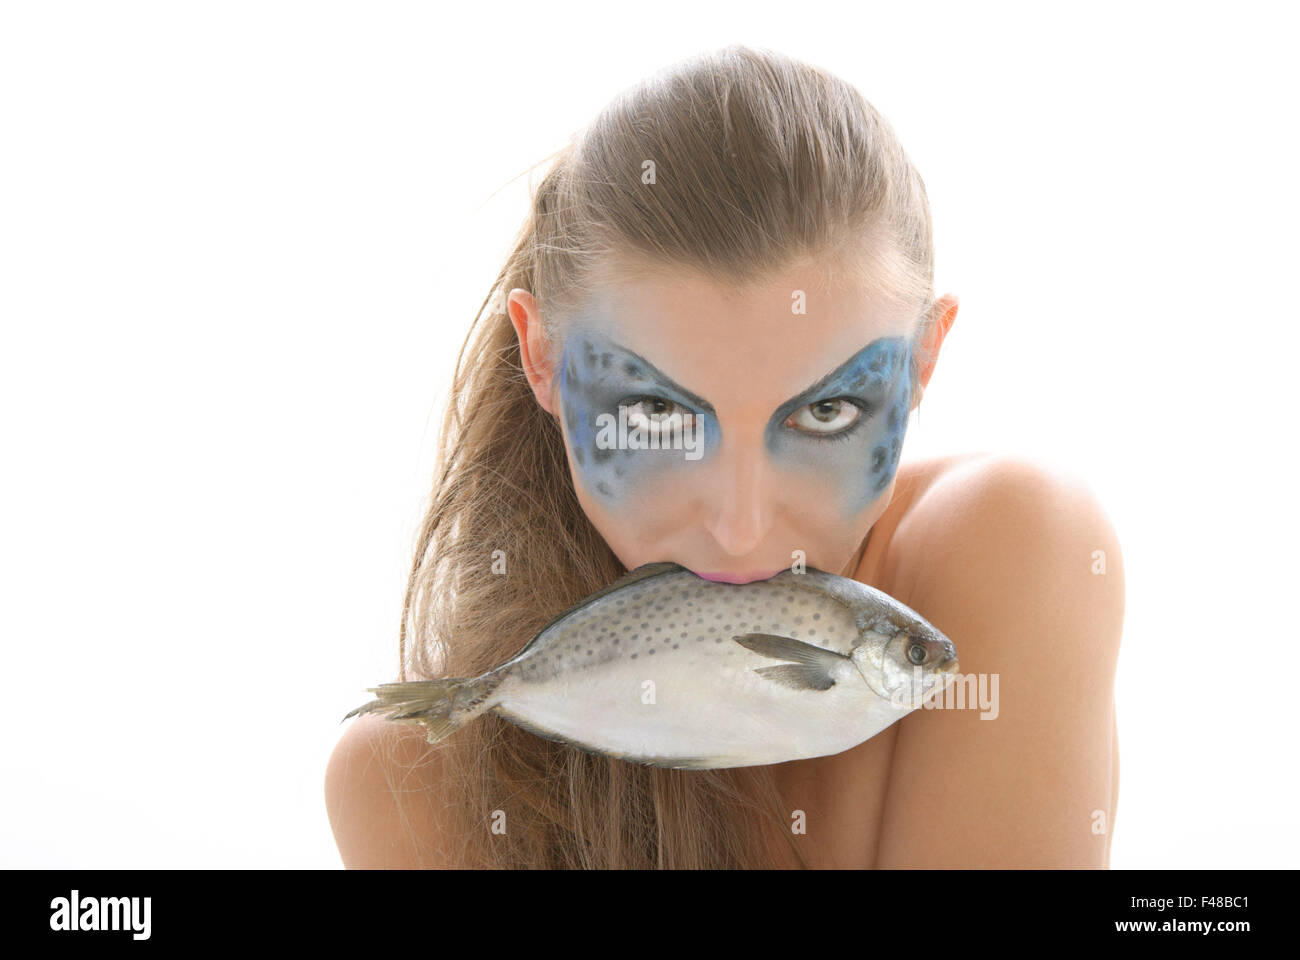 Woman in make-up with fish in mouth Stock Photo